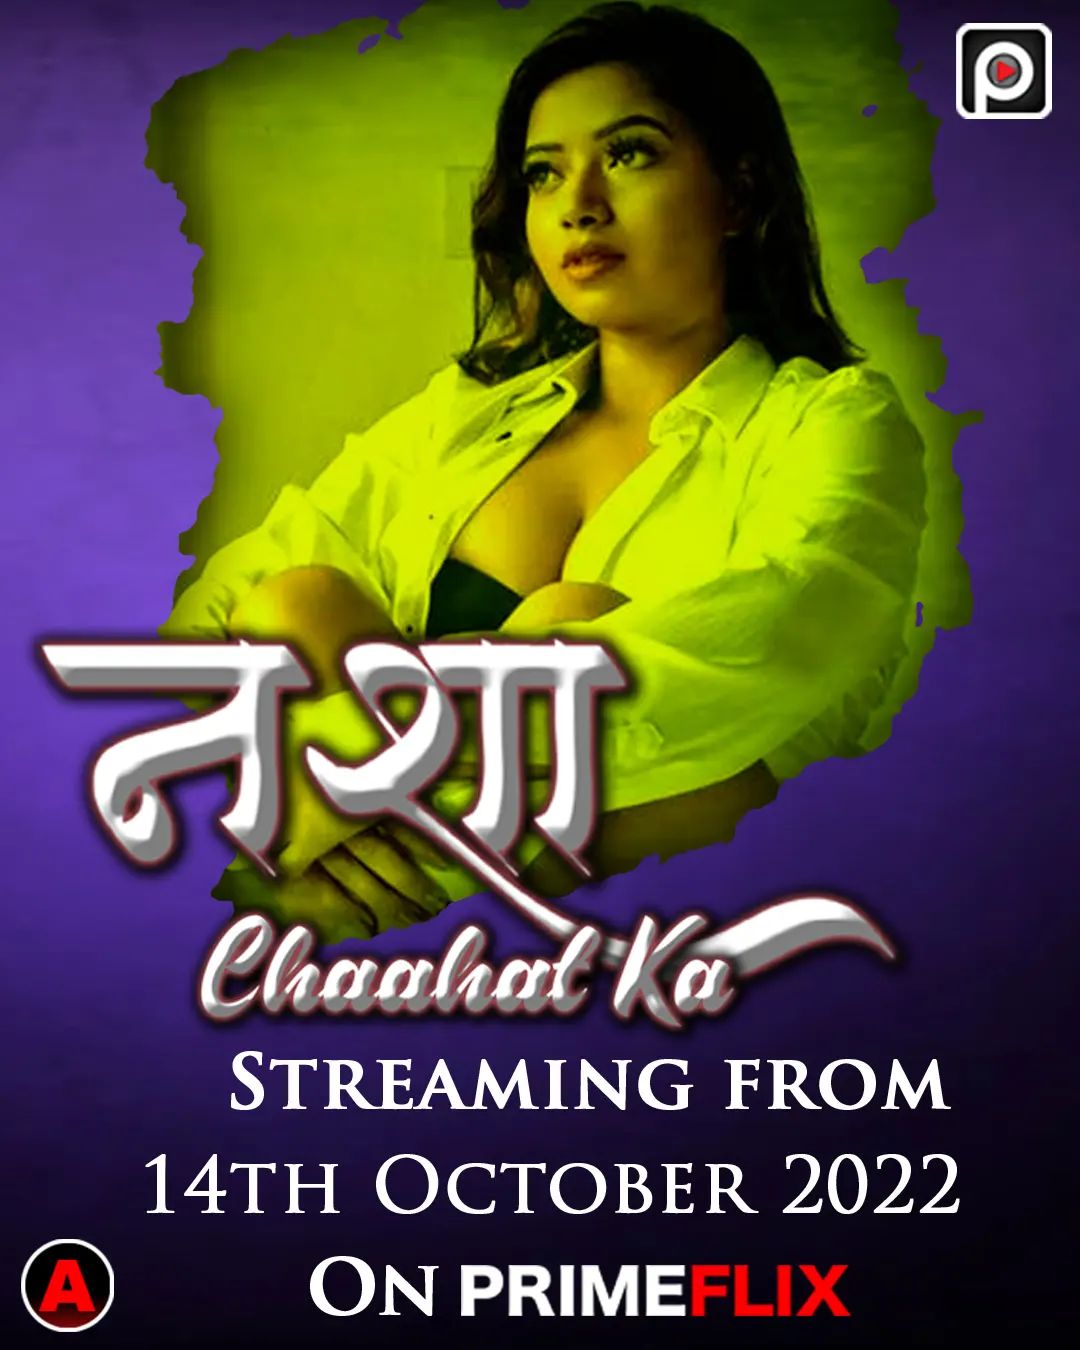 Nasha Chahat Ka Web Series Actresses, Trailer And All Episodes Videos on Prime Flix